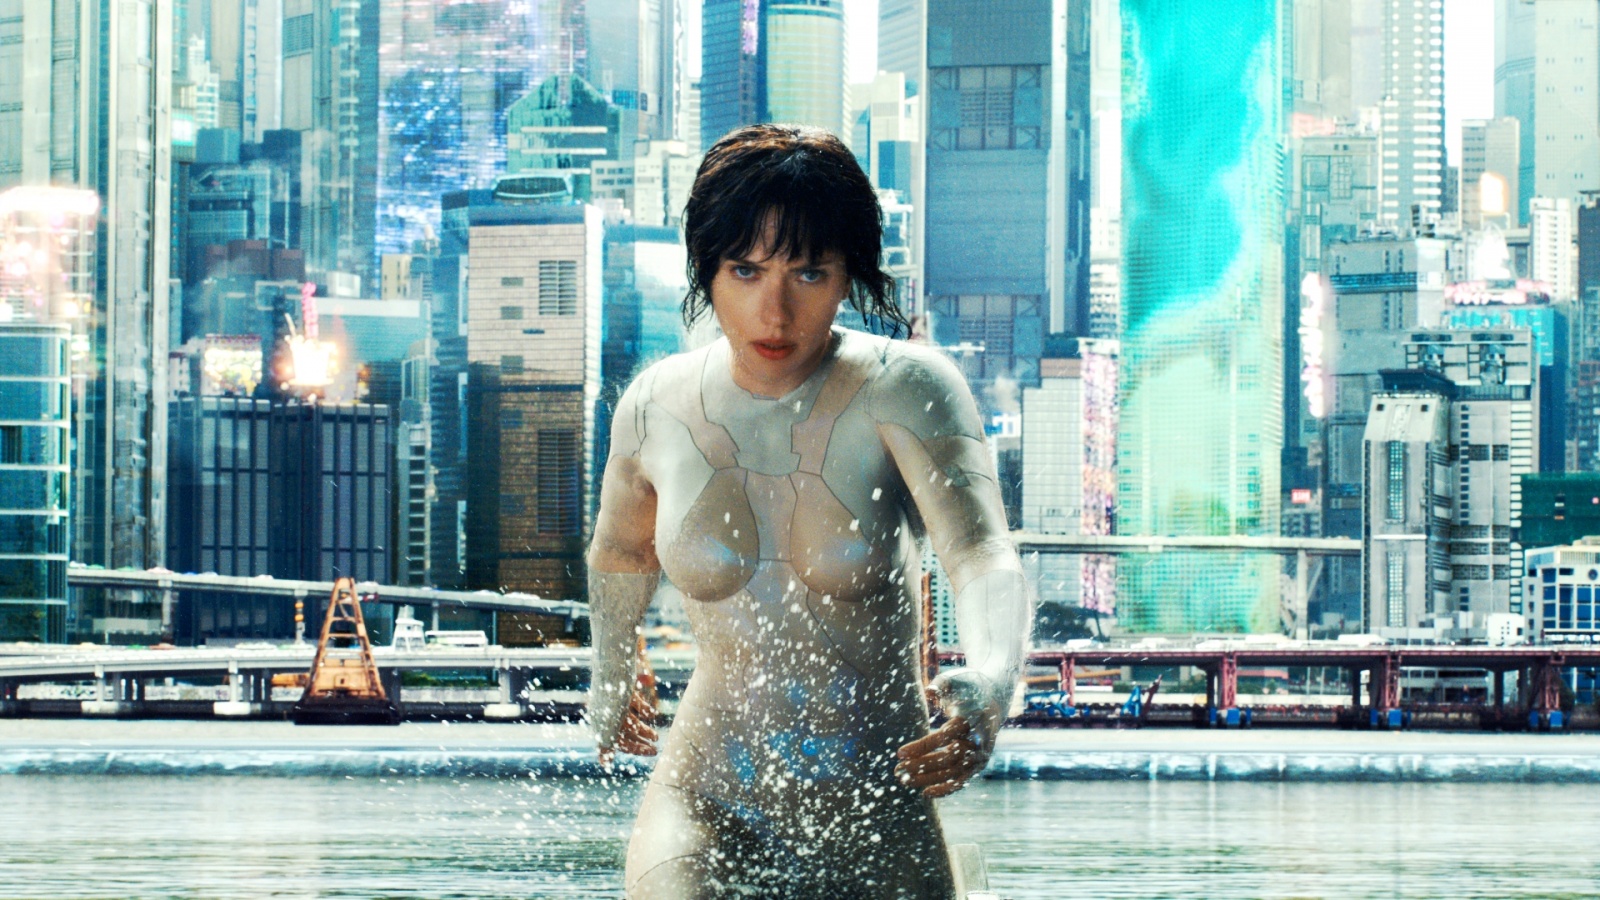 The Major Ghost In The Shell.